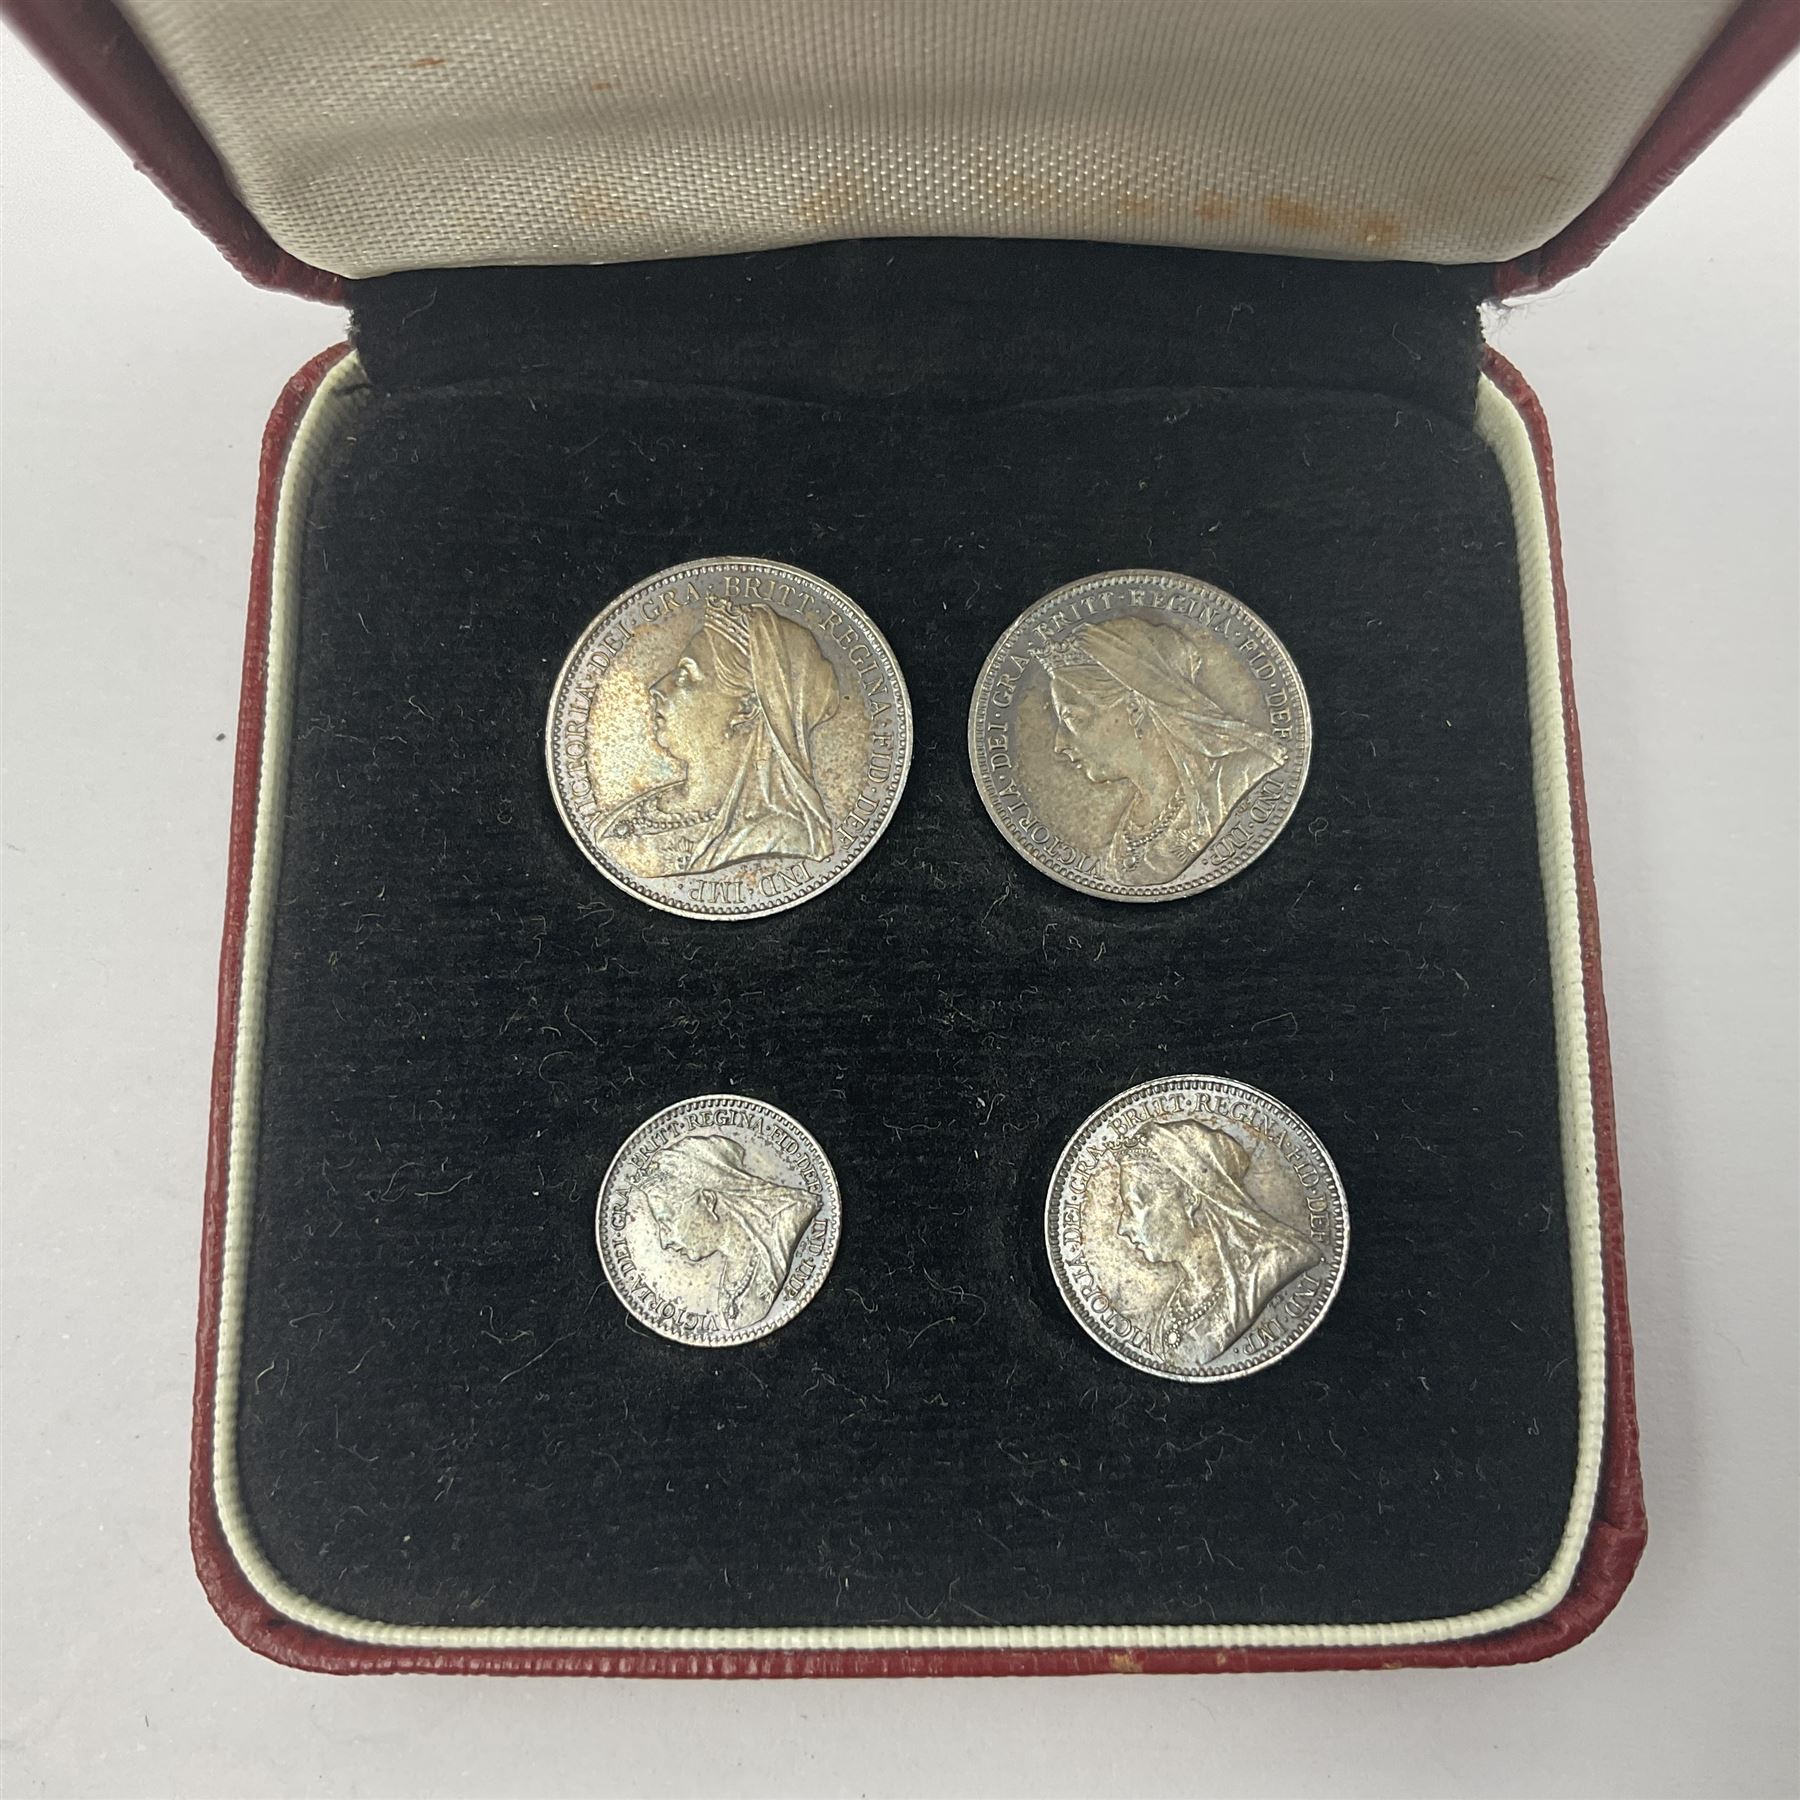 Queen Victoria 1896 maundy coin set - Image 3 of 3